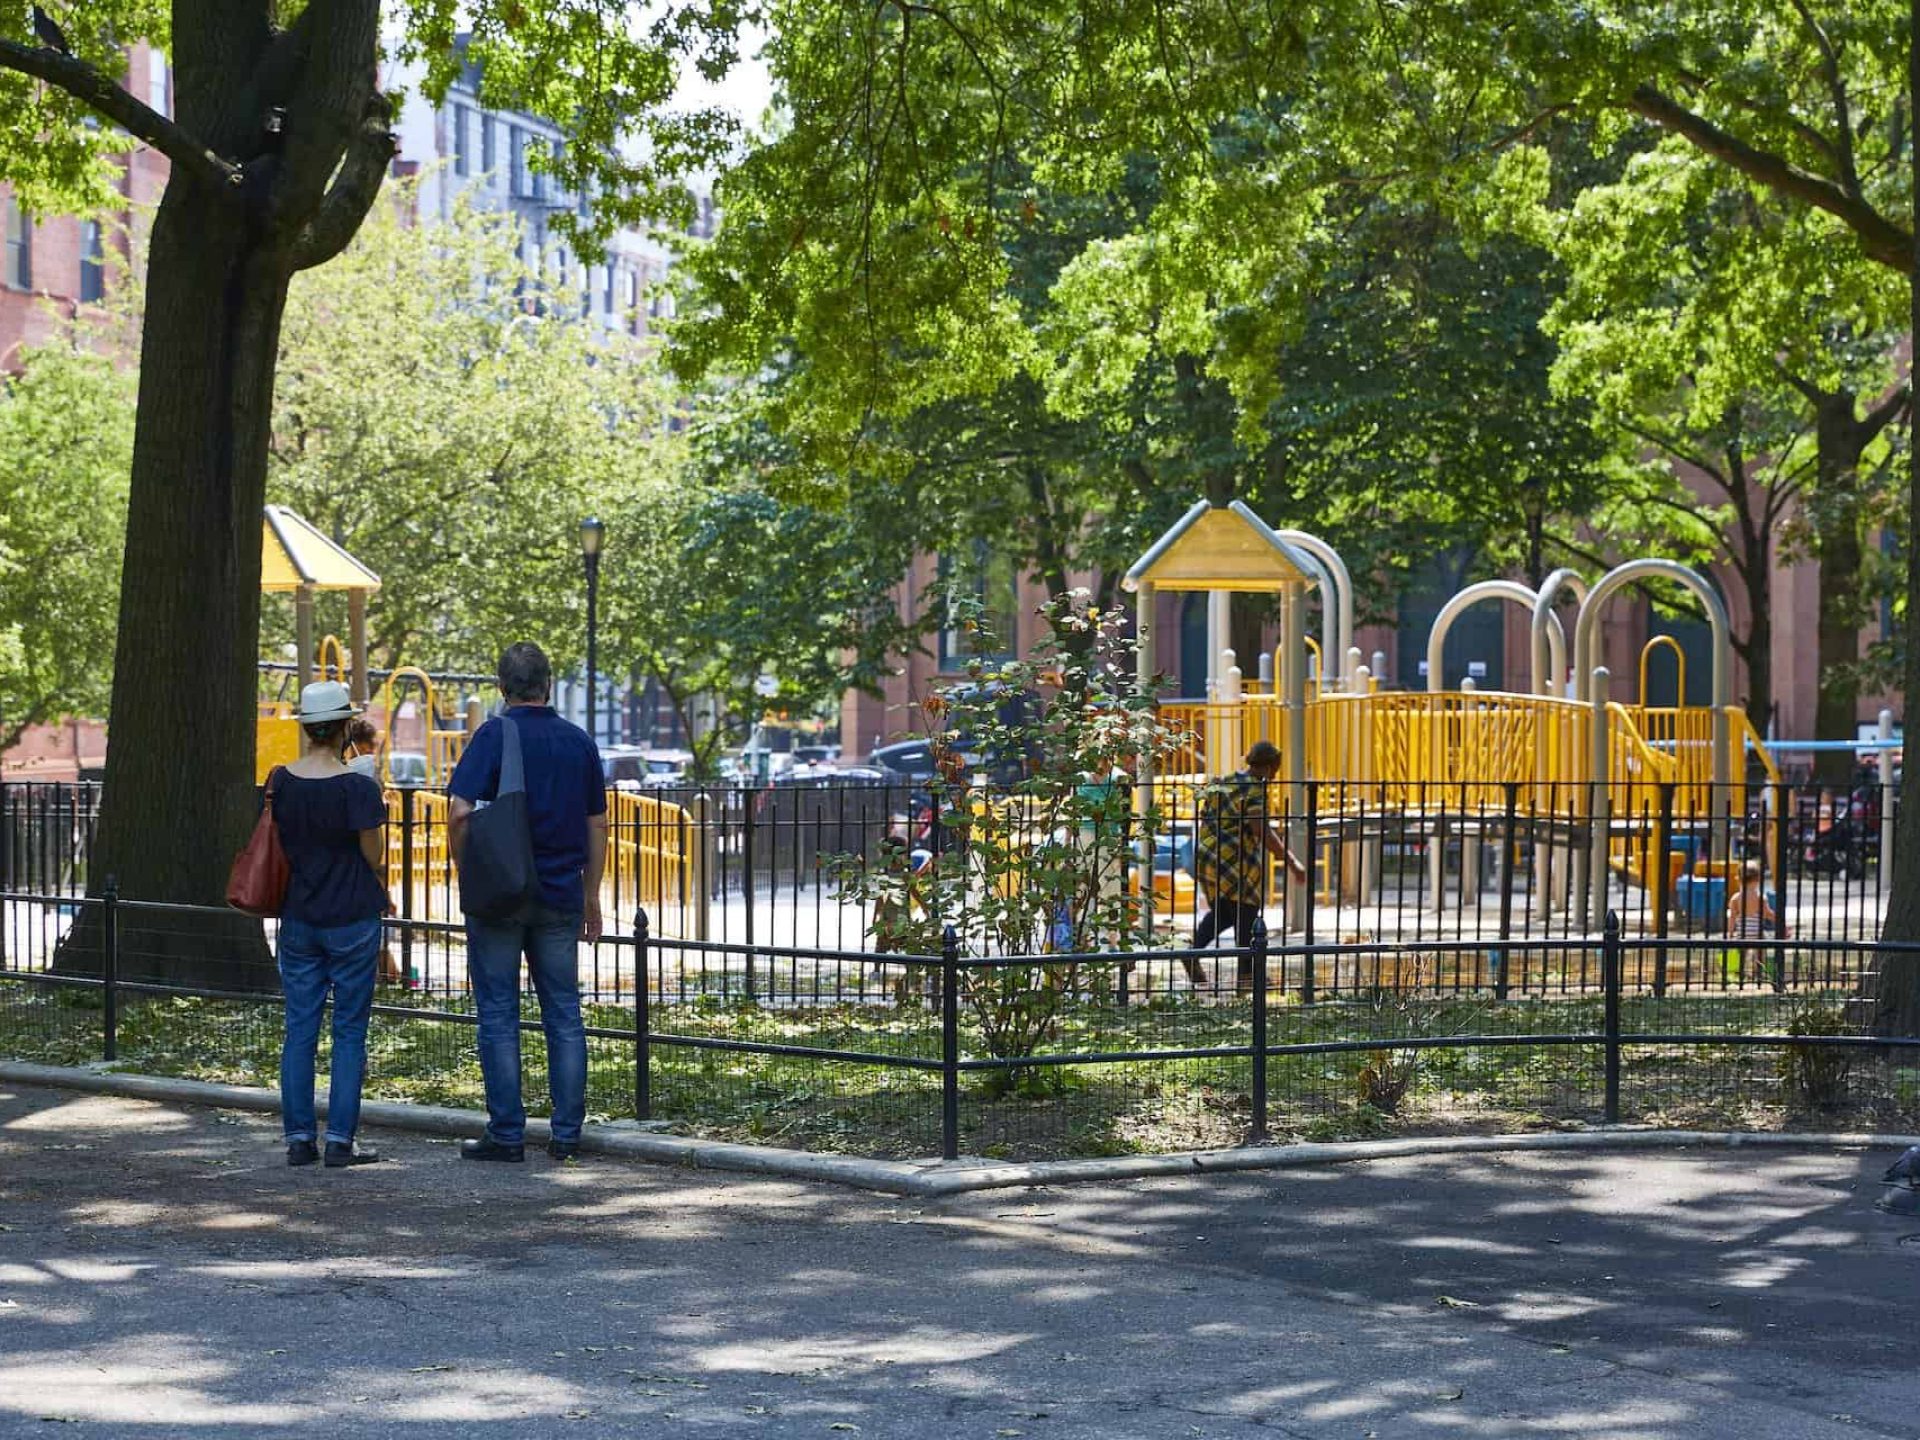 Picture of a children's playground in a city park. Two parents looking at the playground from a park path between trees.